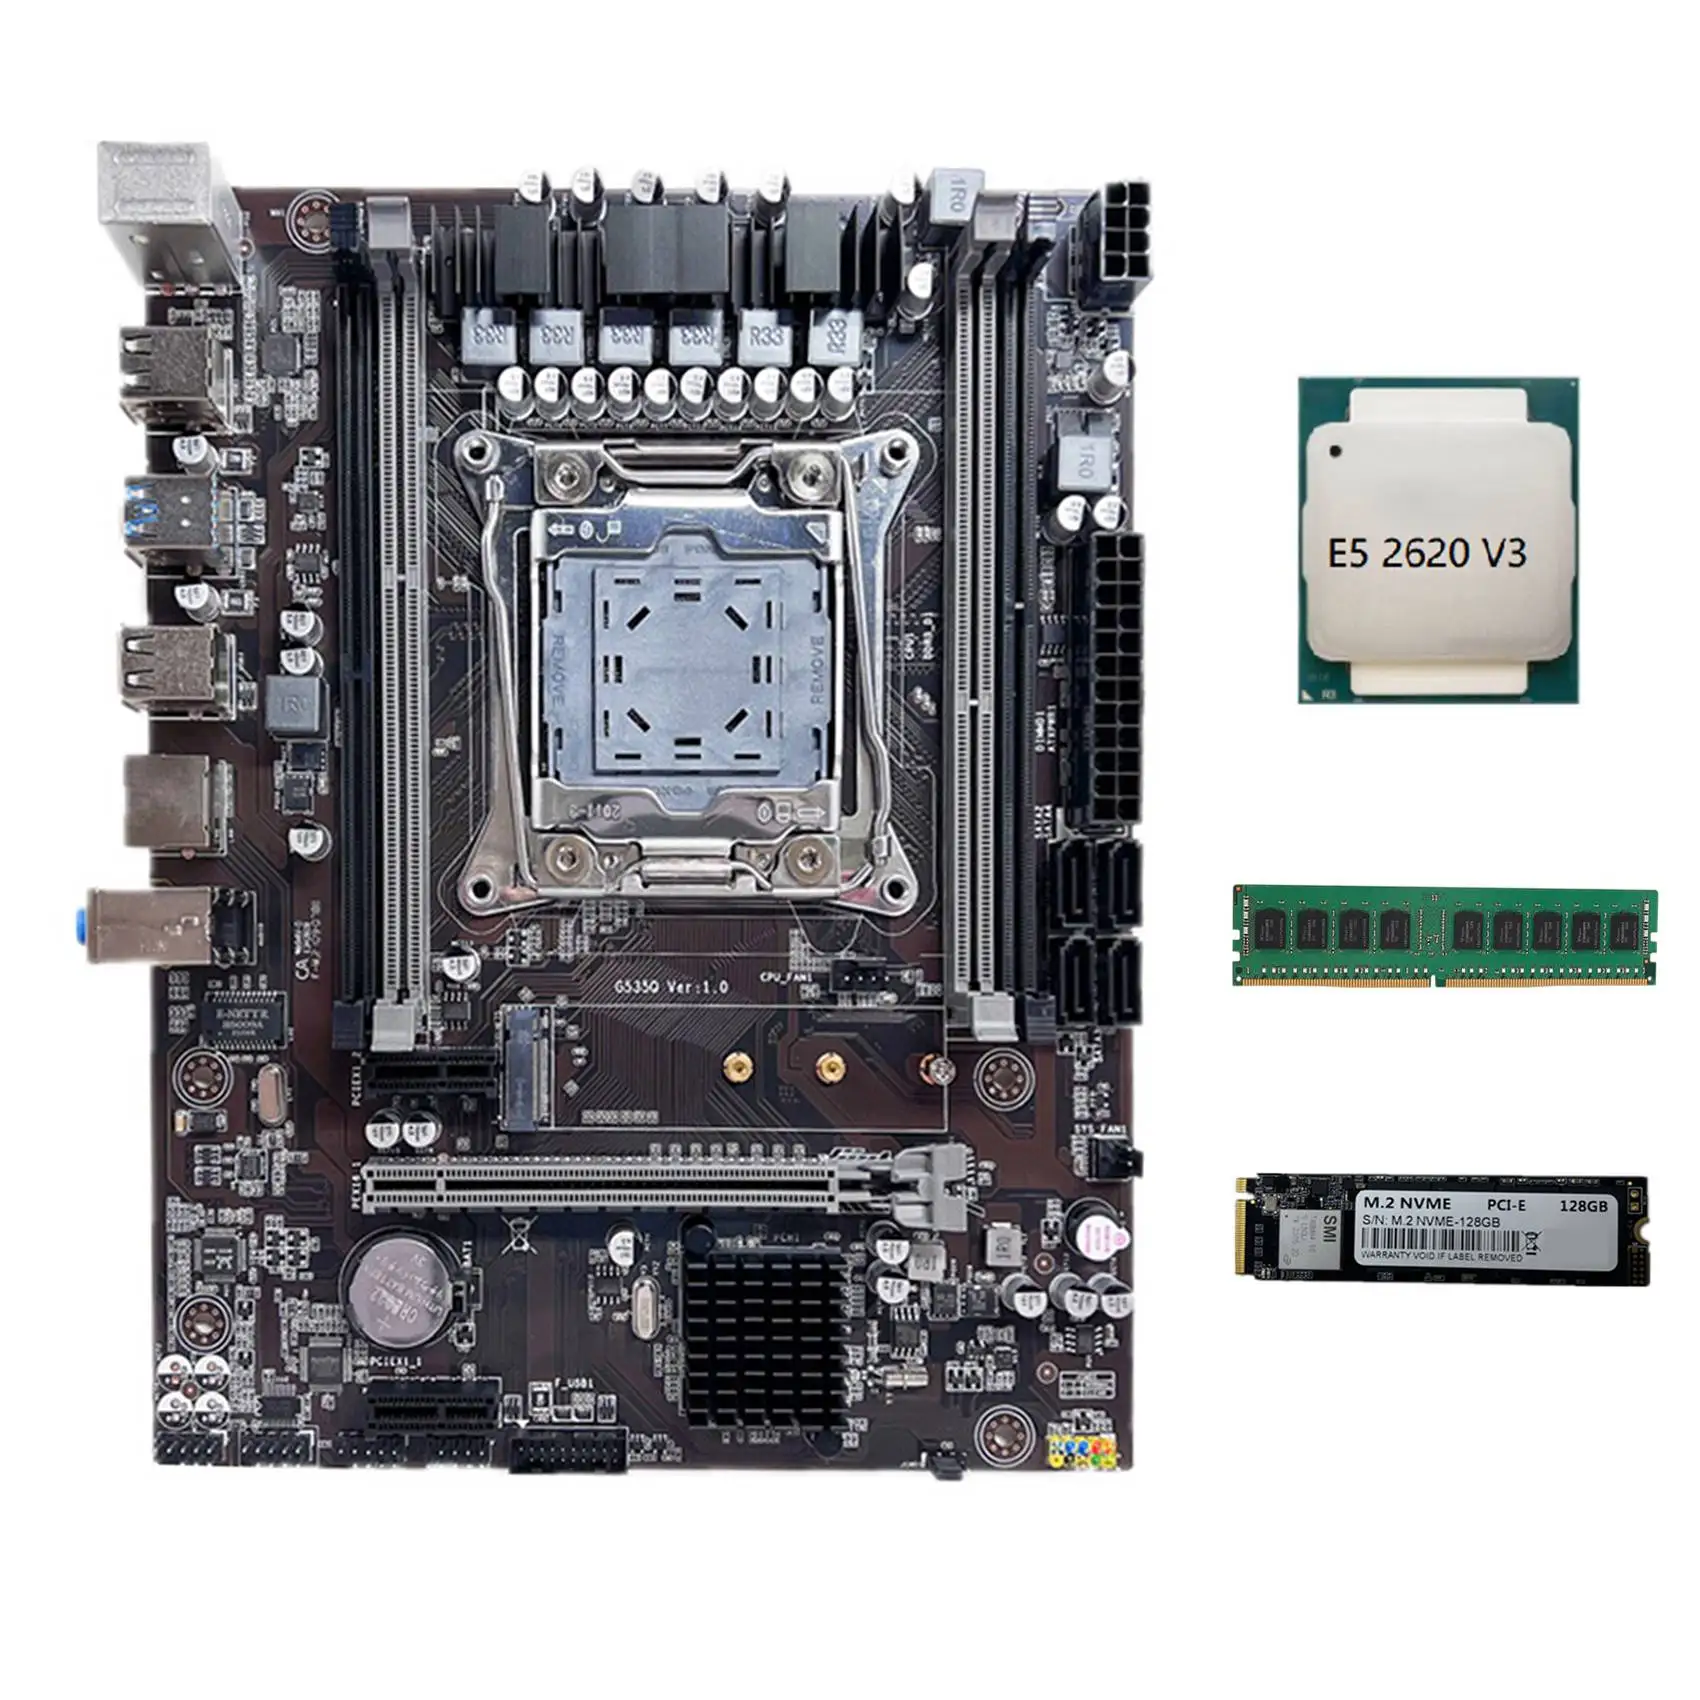 

X99 Motherboard LGA2011-3 Computer Motherboard Support DDR4 RAM with E5 2620 V3 CPU+DDR4 4GB 2133Mhz RAM+M.2 SSD 128G